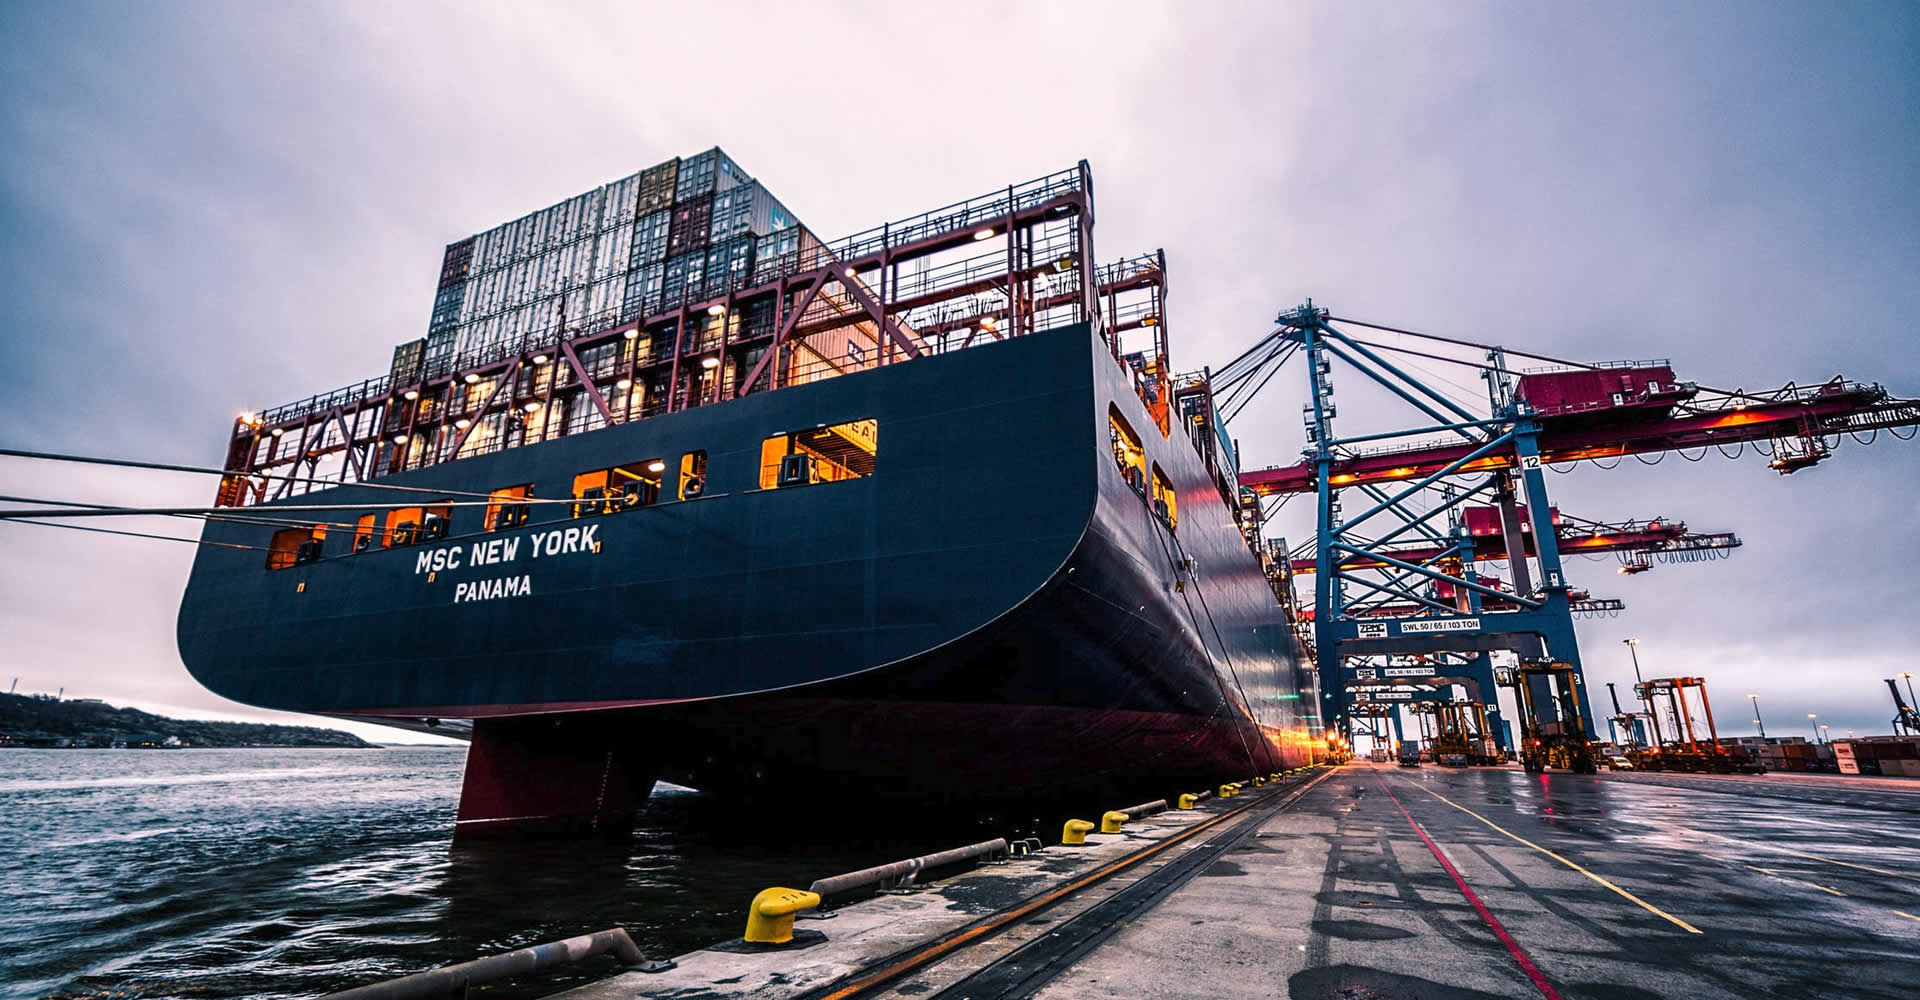 DynaLiners Daily - Increasing port calls from Asia to Europe - News » Dynamar B.V. Maritime Reports